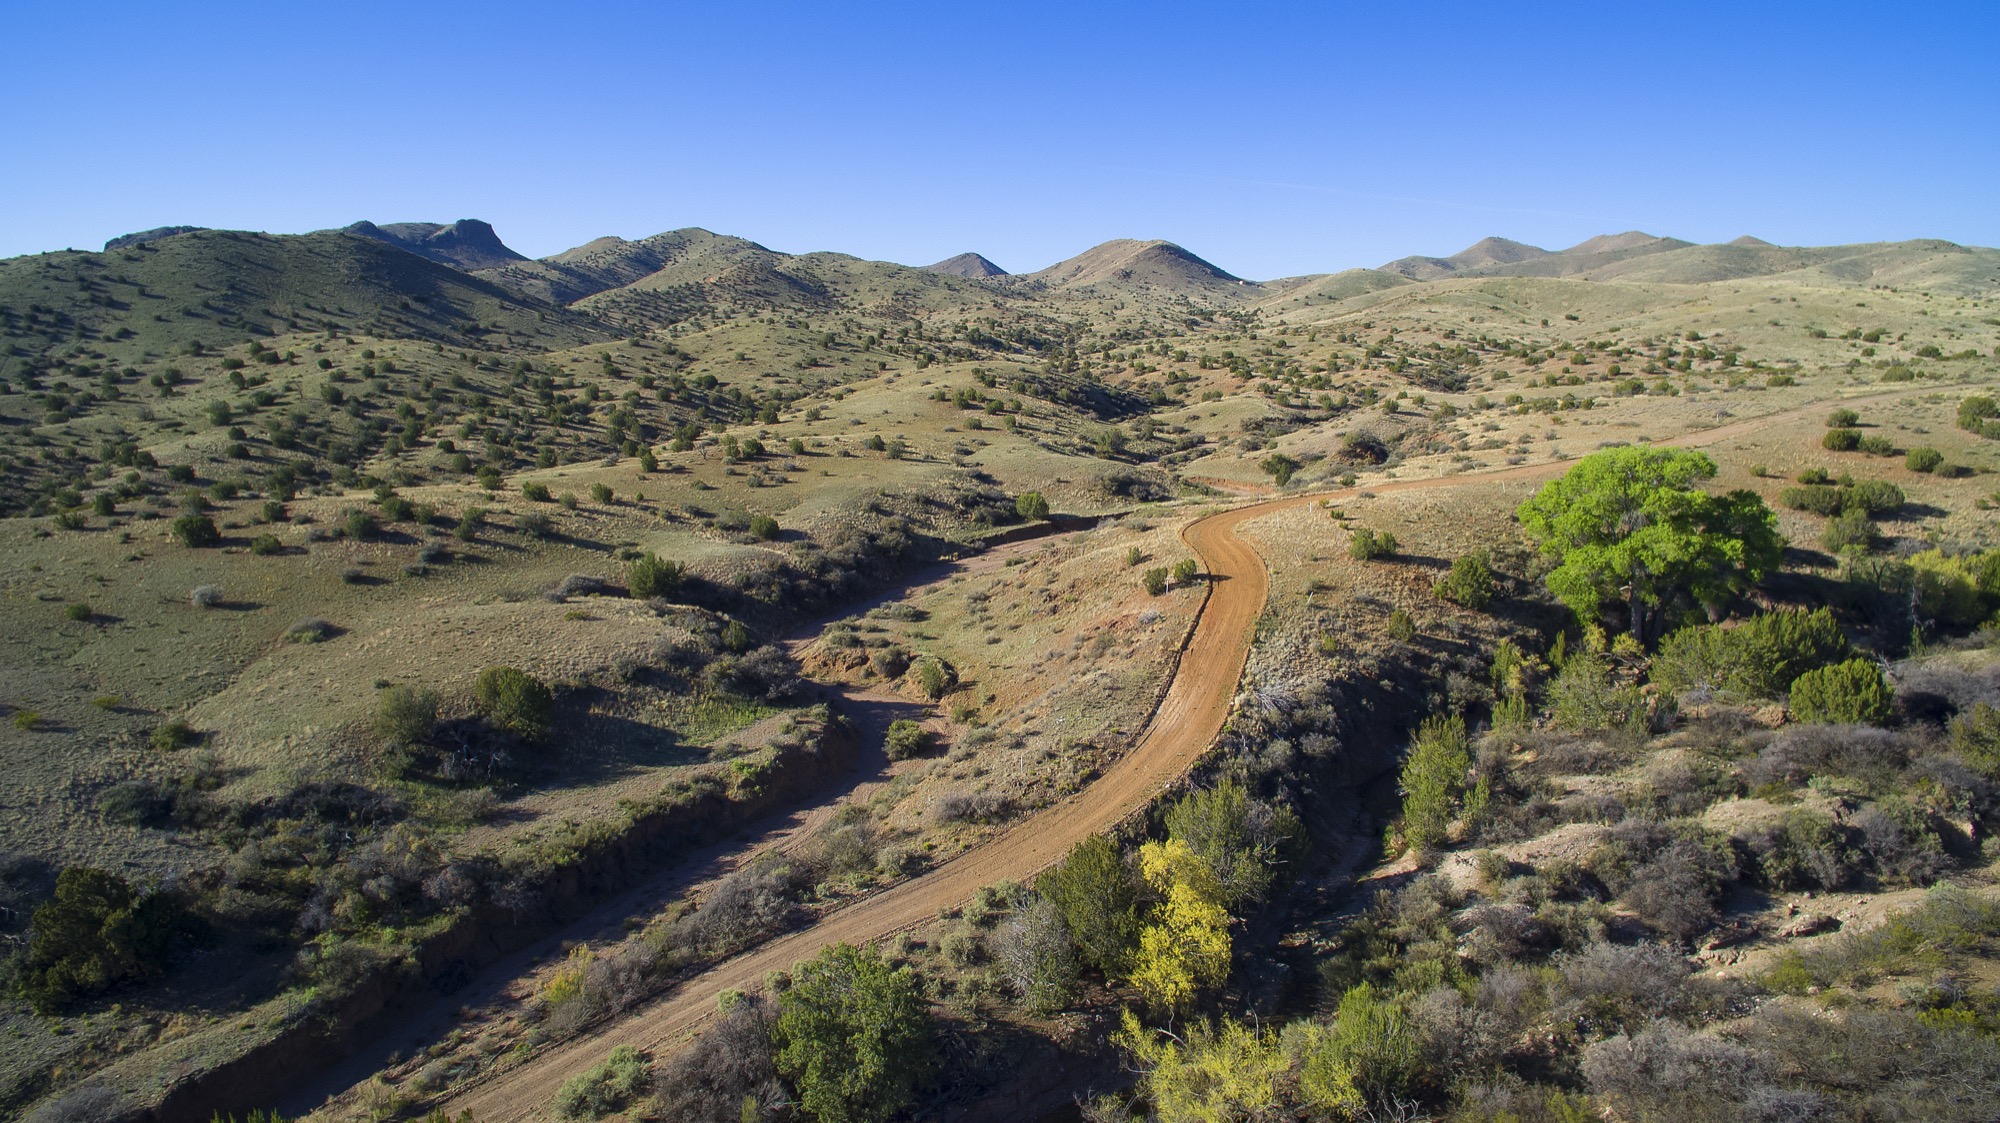 The dirt road access to the ranch